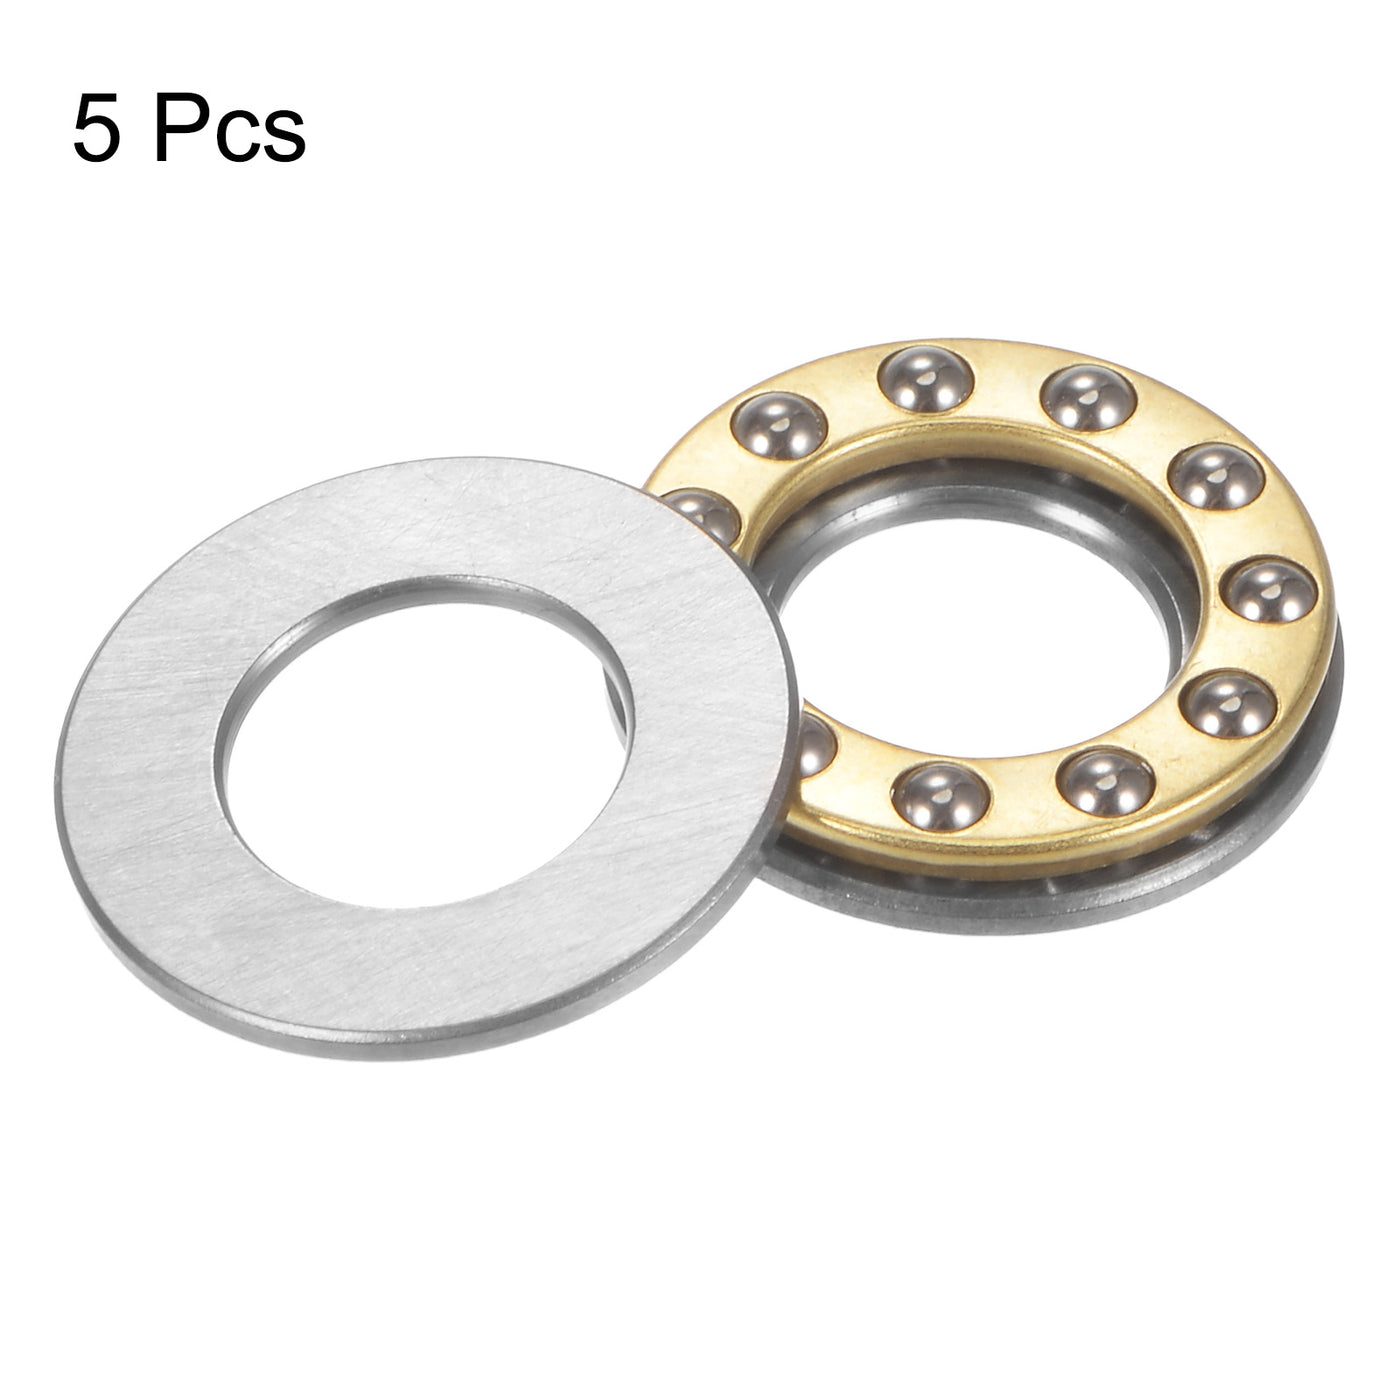 uxcell Uxcell F12-21M Thrust Ball Bearing 11x21x5mm Brass with Washers 5pcs